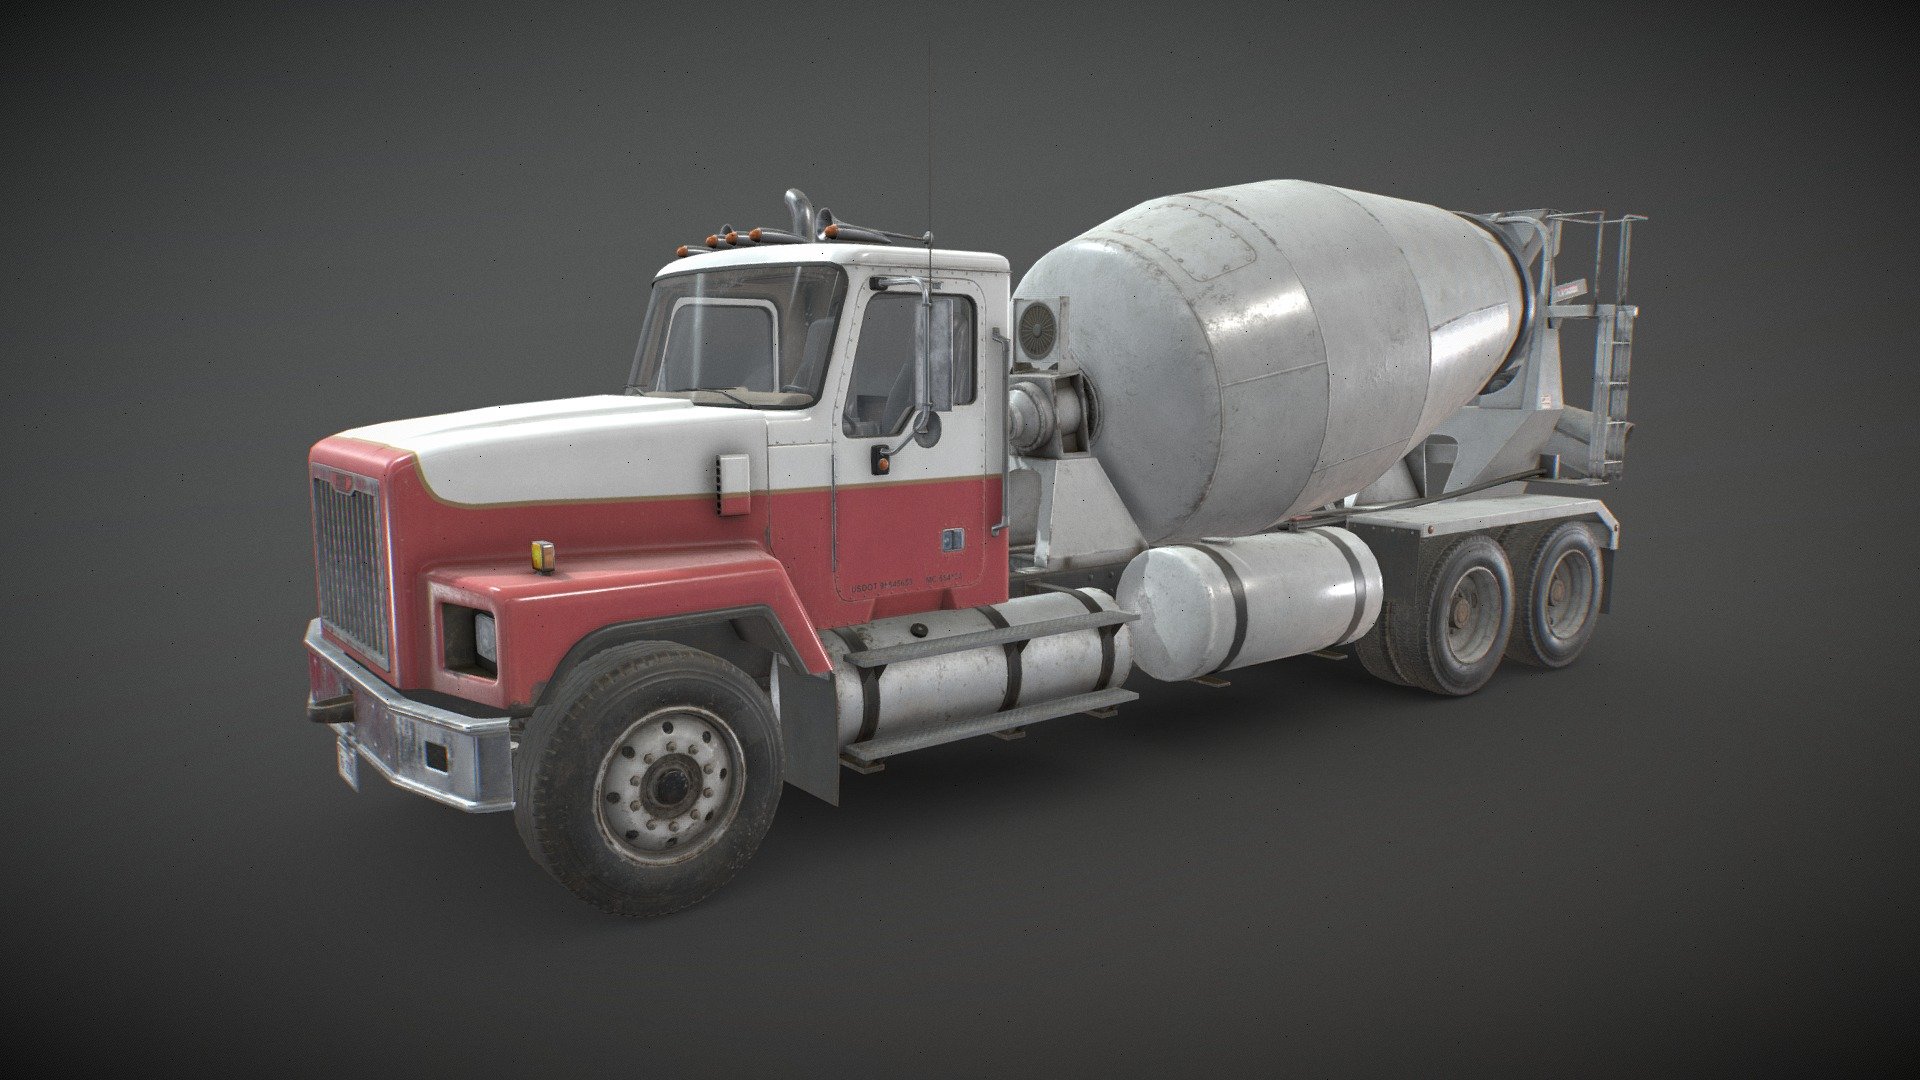 Generic Classic Mixer Truck 3D  low poly model:




The unit of measurement used is centimeters

Doors, wheels, steering wheel, mixer drum, ladder and discharging system are separated and can be easily rigged/animated (model not animated).

Interior is a separate object to detach if needed.

PBR textures made in Substance Painter

All branding and labels are custom made.

Model also compatible with other &ldquo;Classic Truck